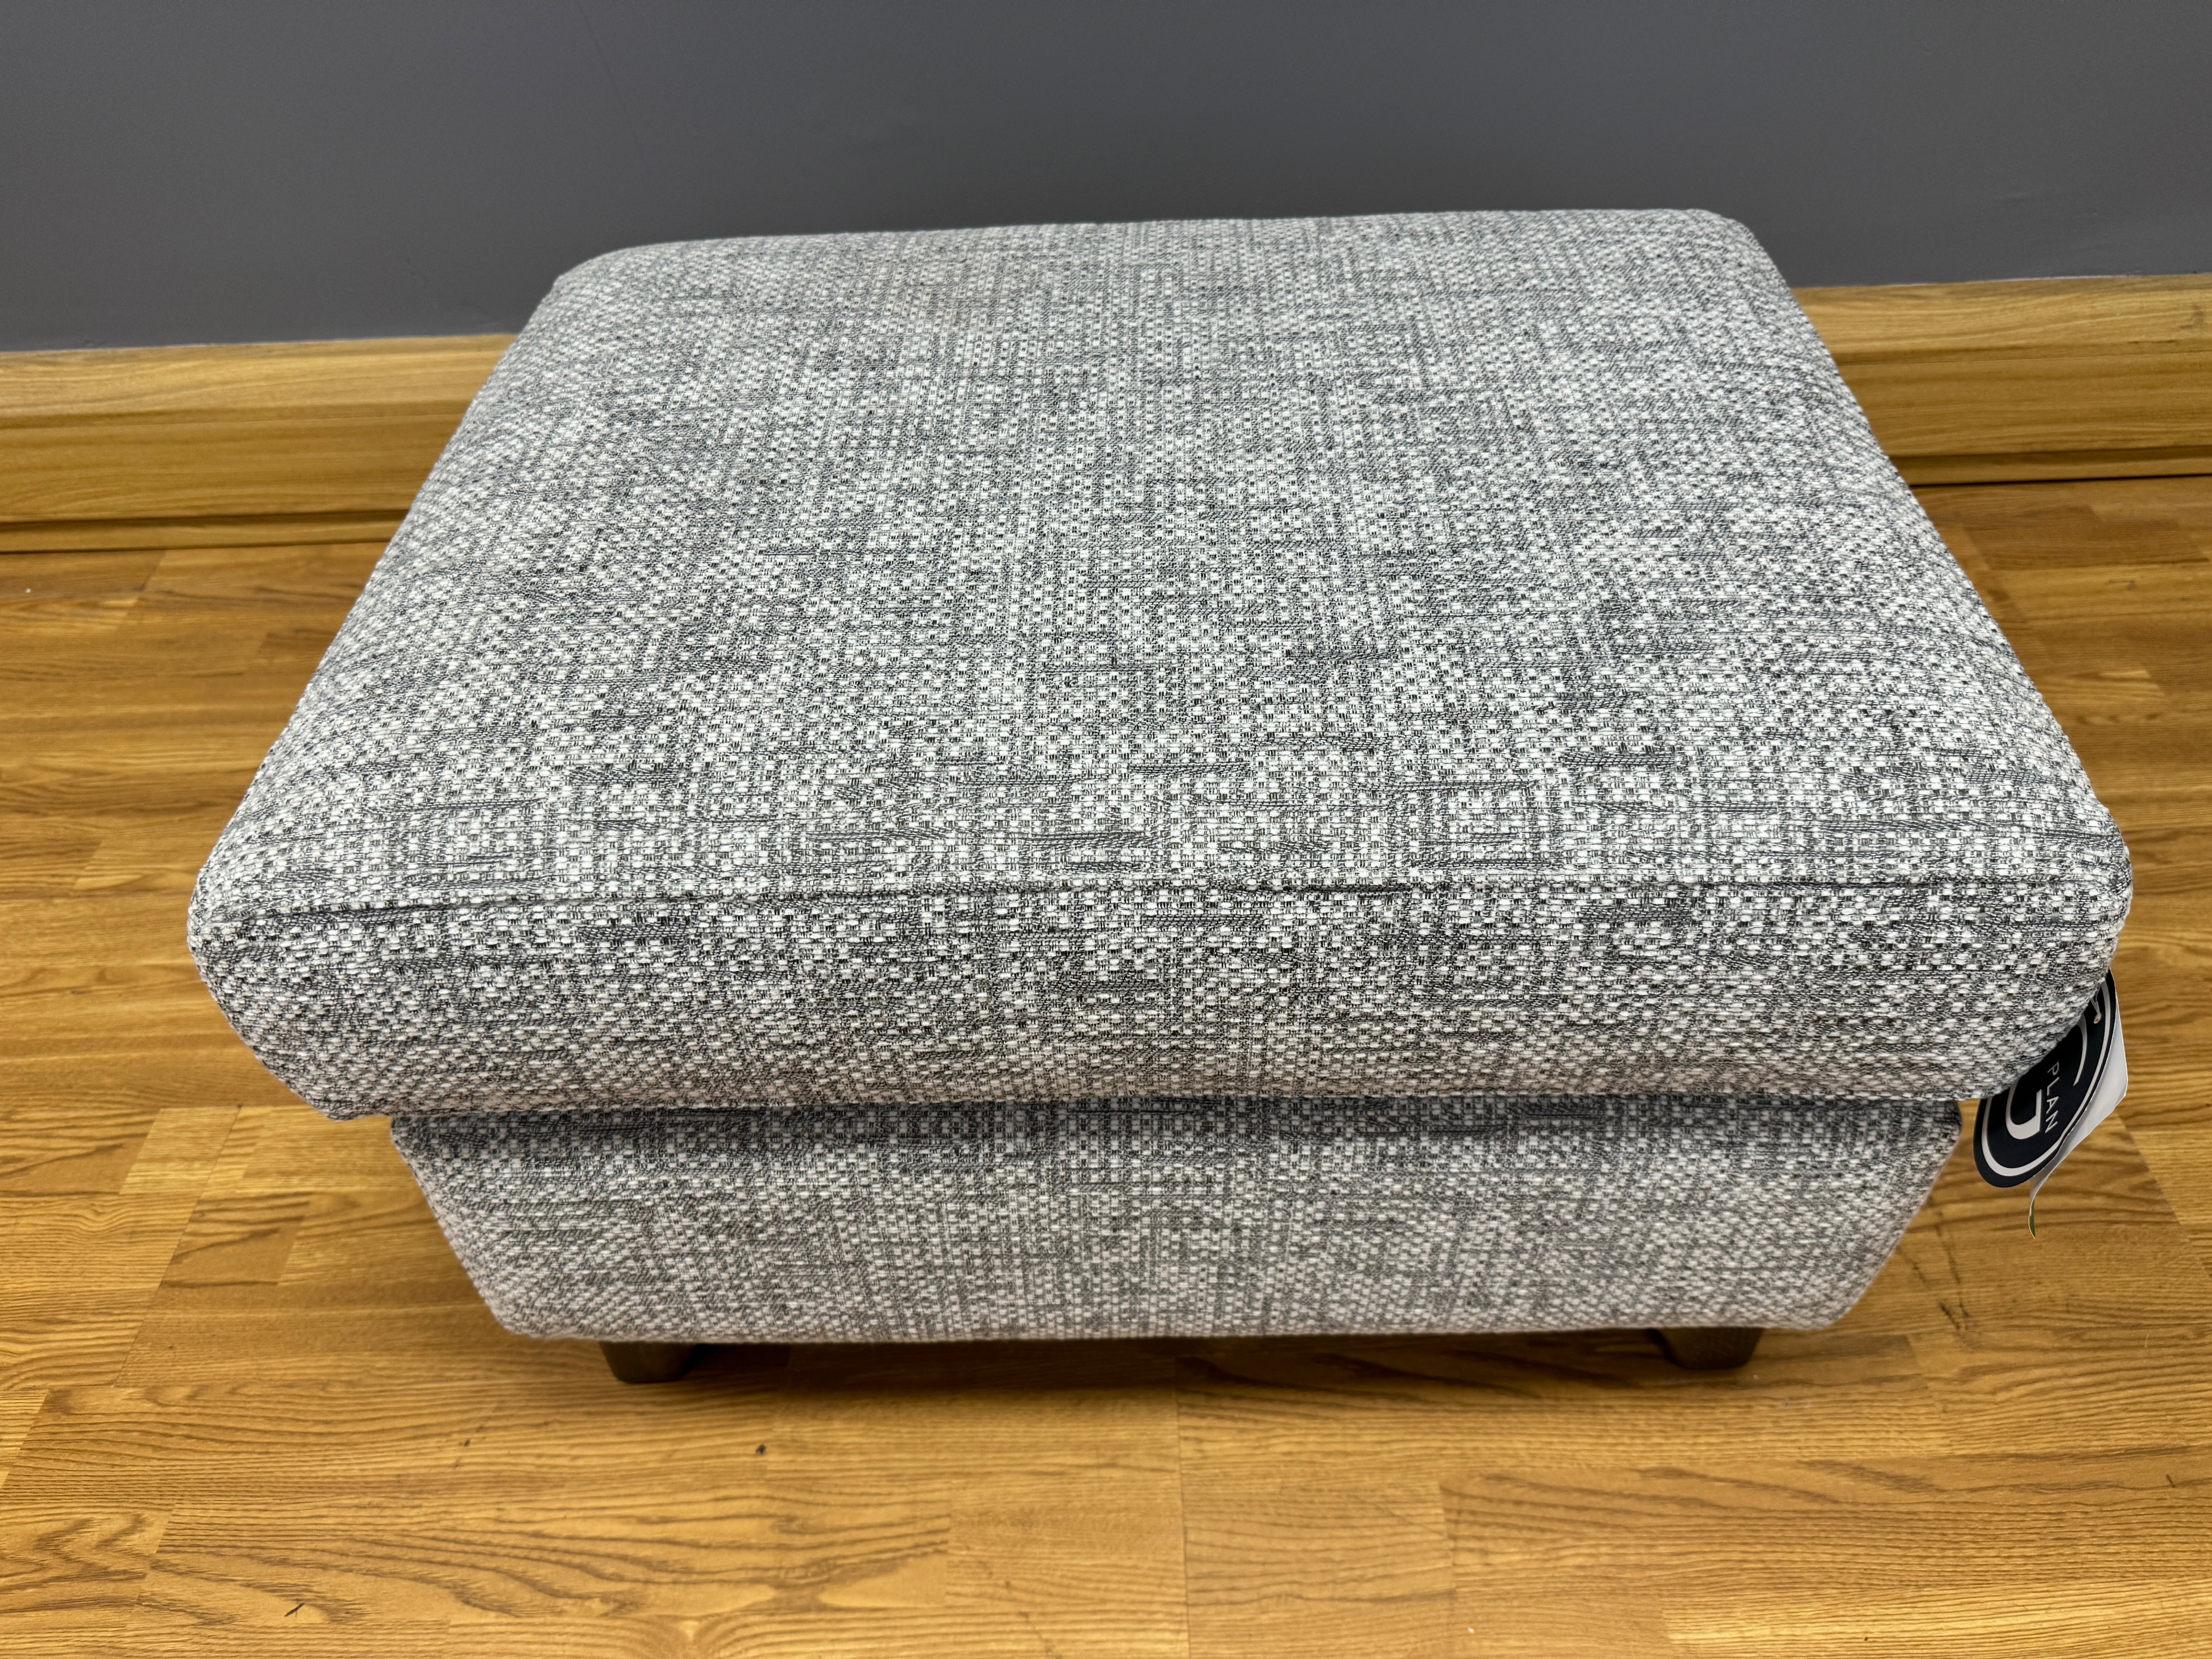 G PLAN SEATTLE padded top footstool in light mid grey weave fabric